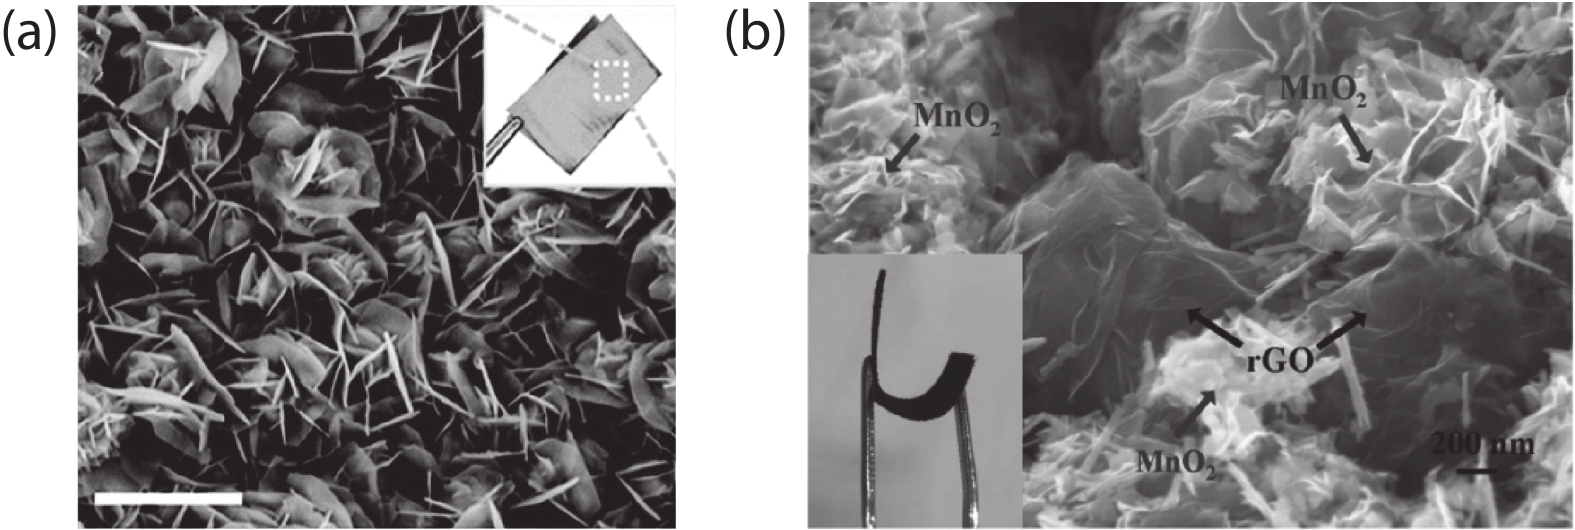 (a) SEM image of the zinc anode by electrically depositing onto a carbon cloth. Adopted with permission from Ref. [18], Copyright 2019, Royal Society of Chemistry. (b) SEM image and the photographs (the inset) of the MnO2/rGO sample on carbon cloth. Adopted with permission from Ref. [19], Copyright 2018, Nature Publishing Group.